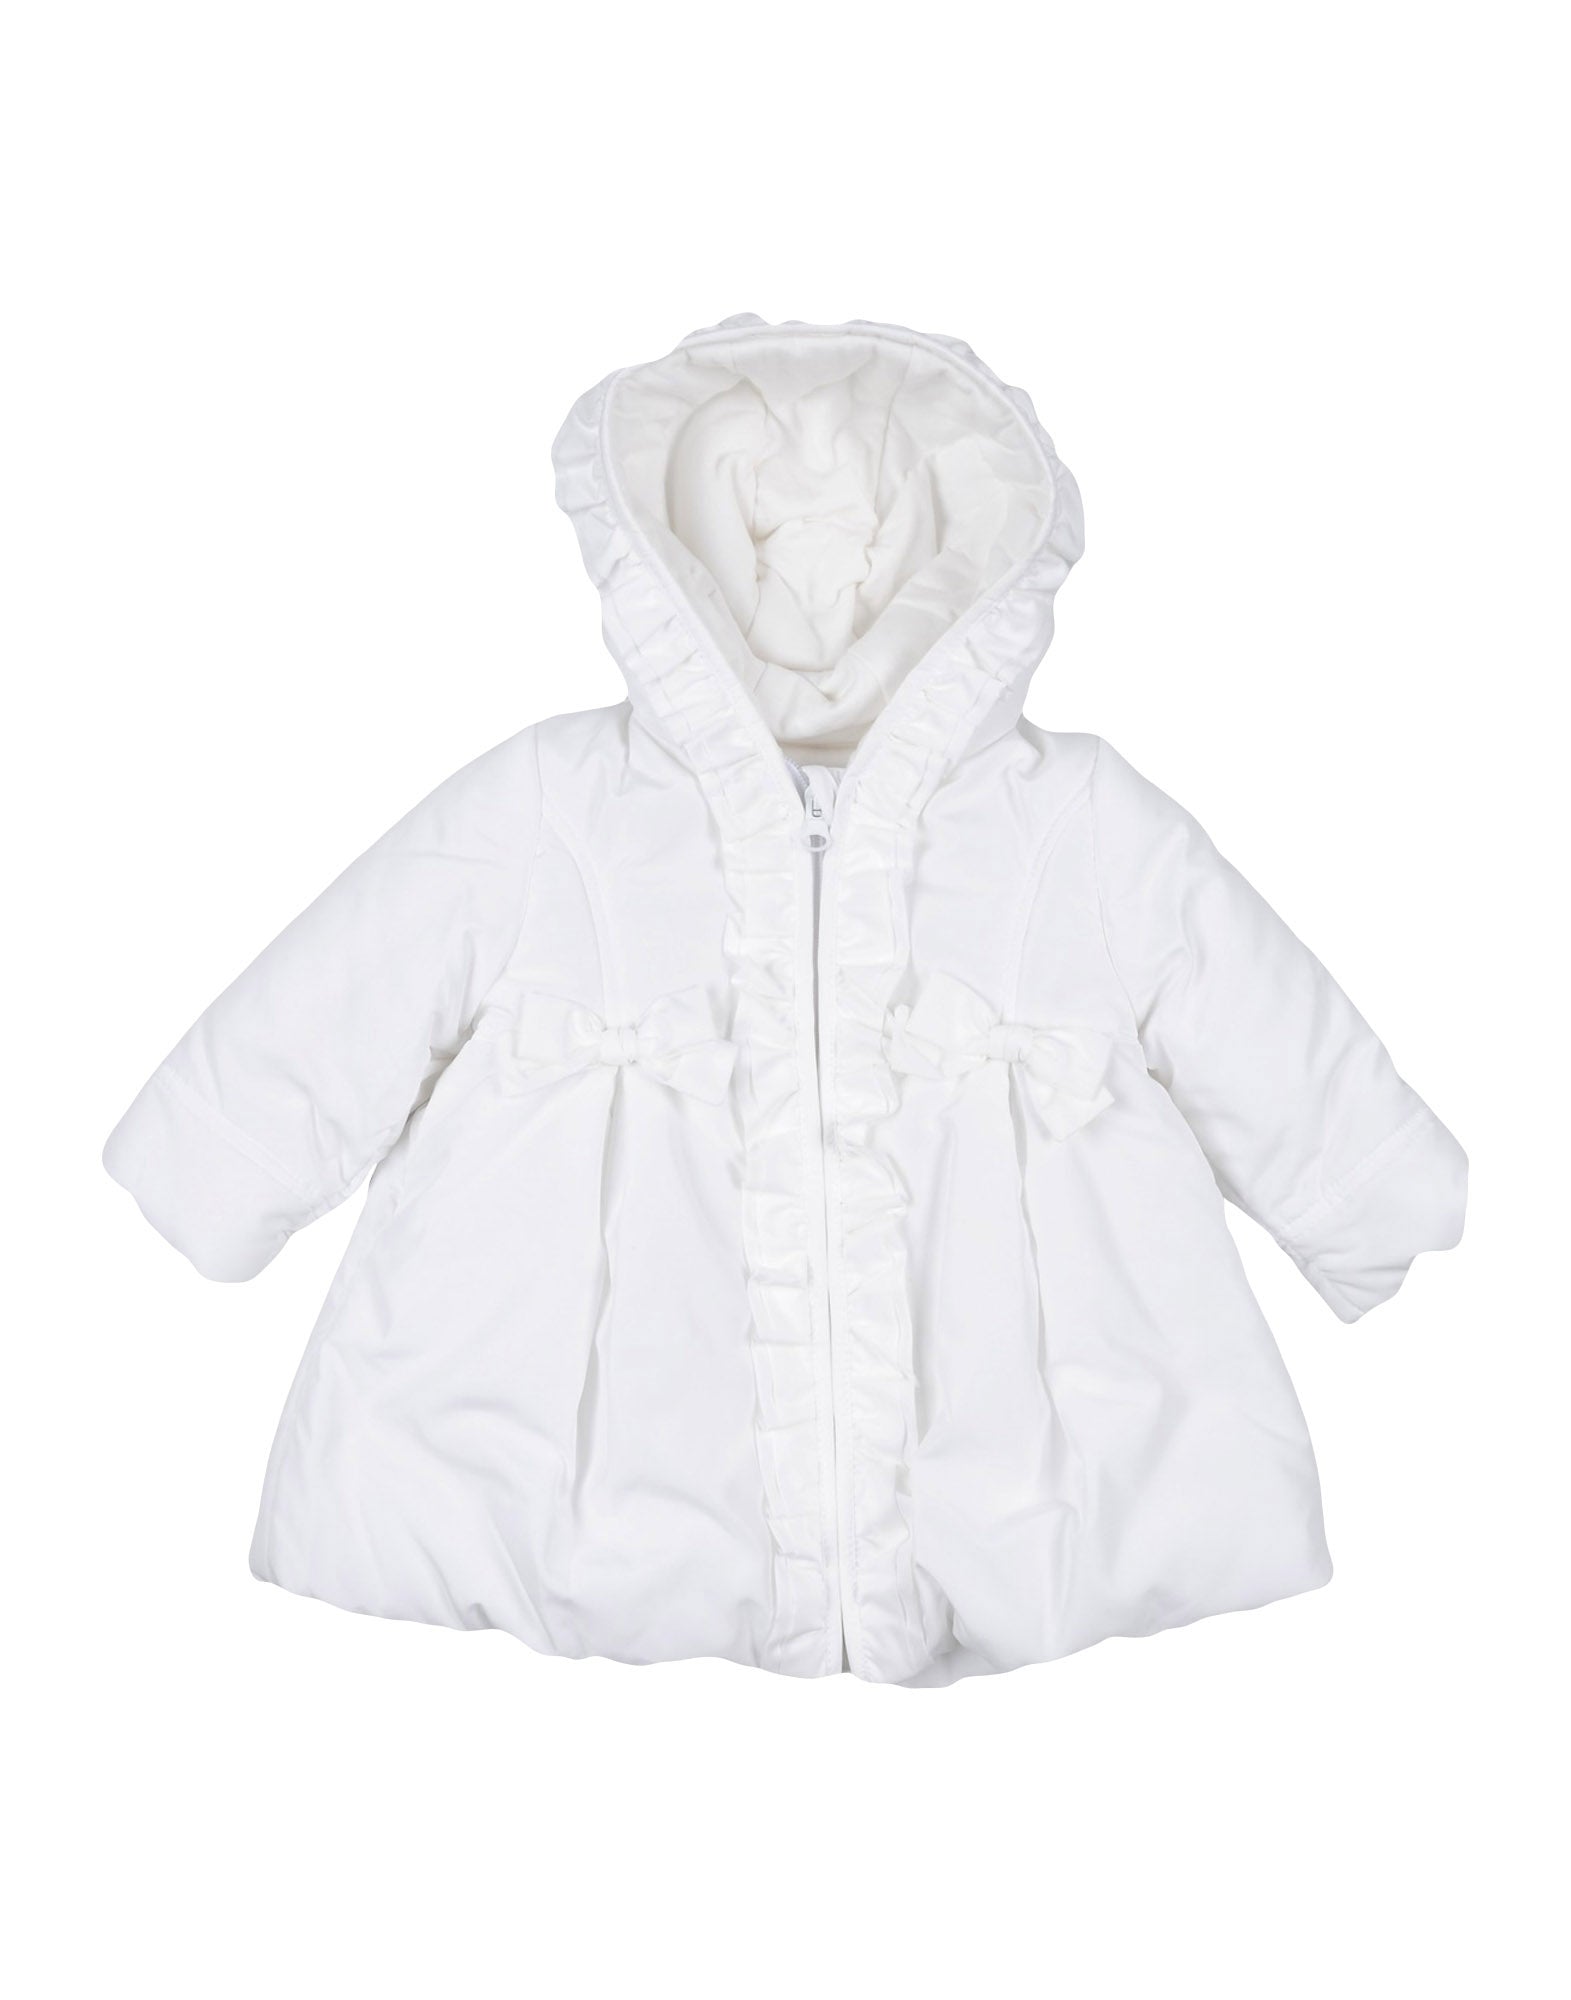 ALETTA Jacket Size 1M Bow Detail Ruffle Trim Full Zip Hooded Made in Italy gallery main photo